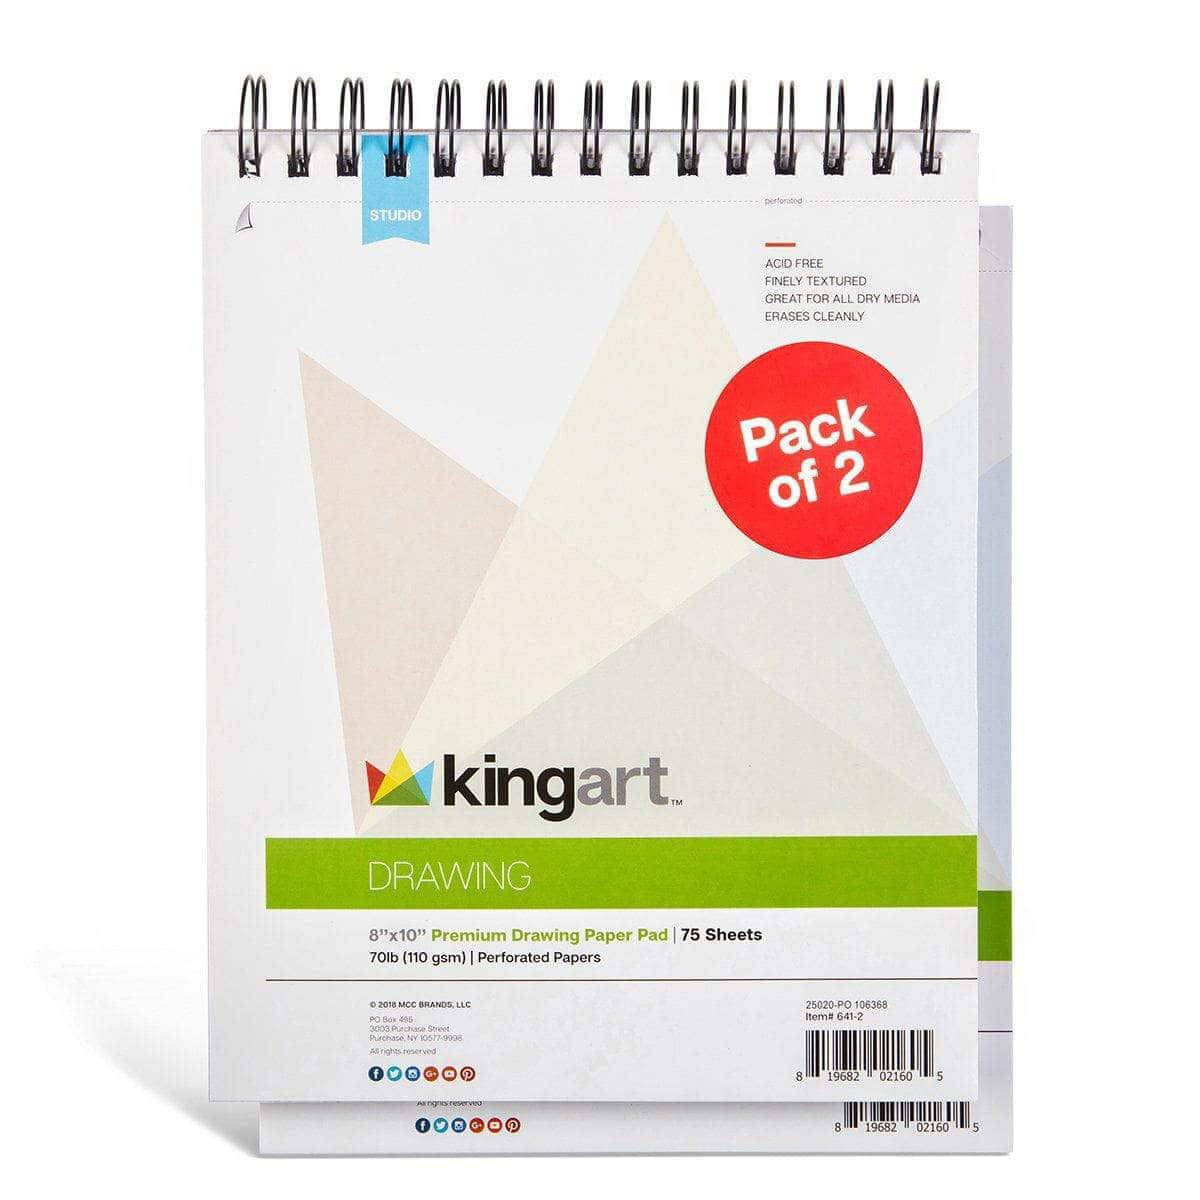 KINGART® Drawing Paper Pad, Pack of 2, 8 x 10 inches, 75 Pages Each,  70lb/110gsm, Micro-Perforated, Spiral Bound